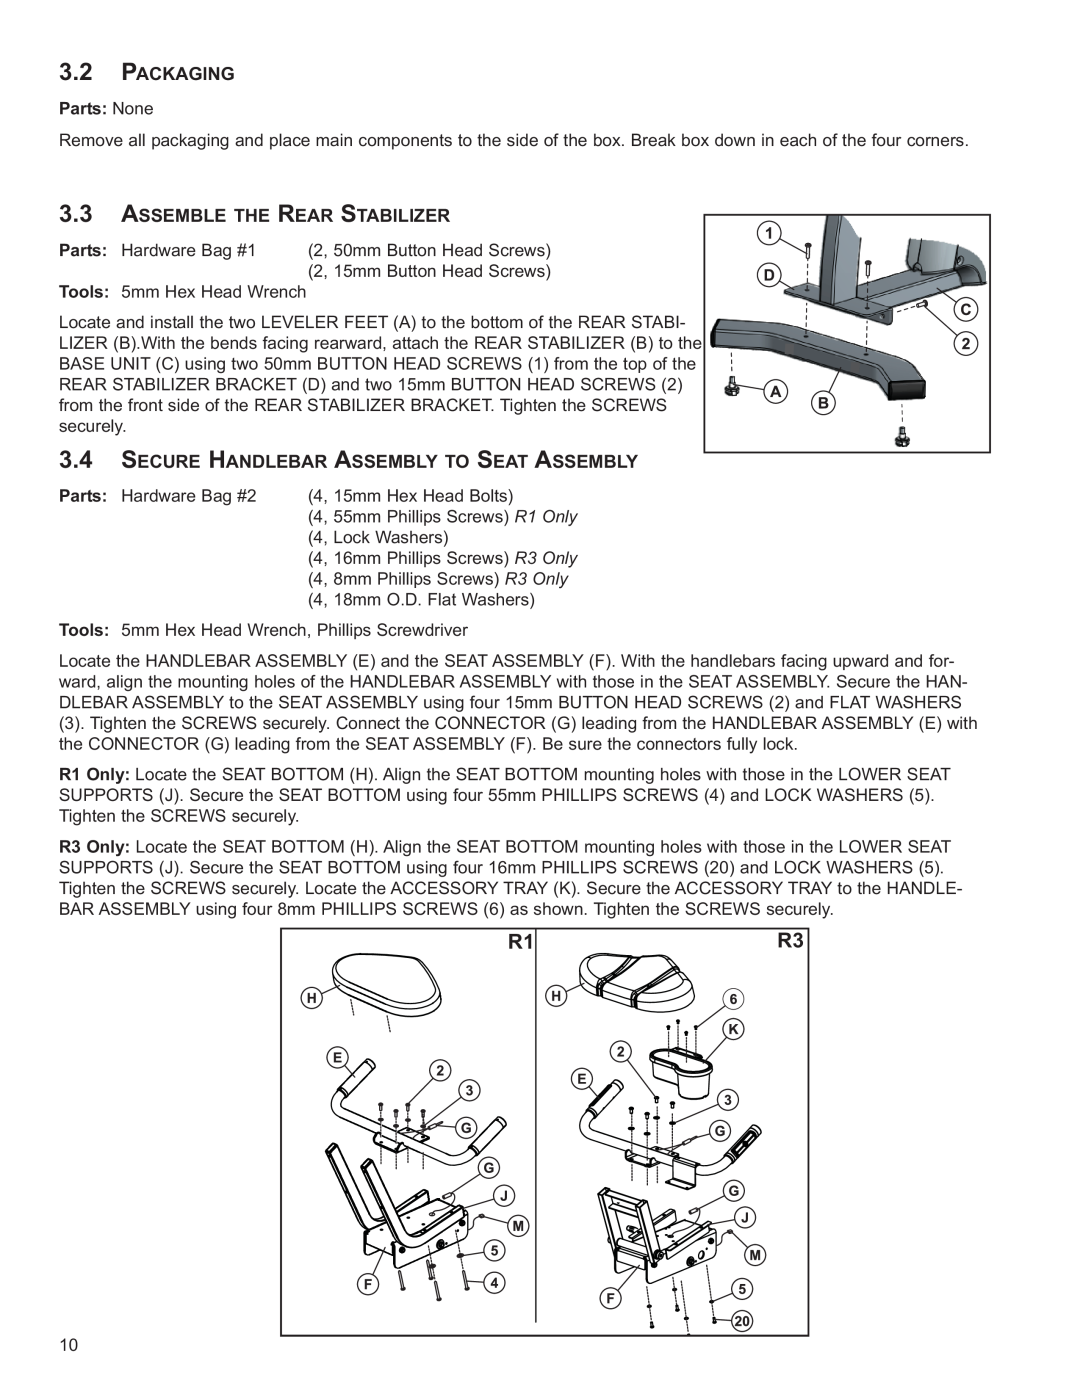 Life Fitness R3 owner manual Packaging, Assemble The Rear Stabilizer, Secure Handlebar Assembly To Seat Assembly 